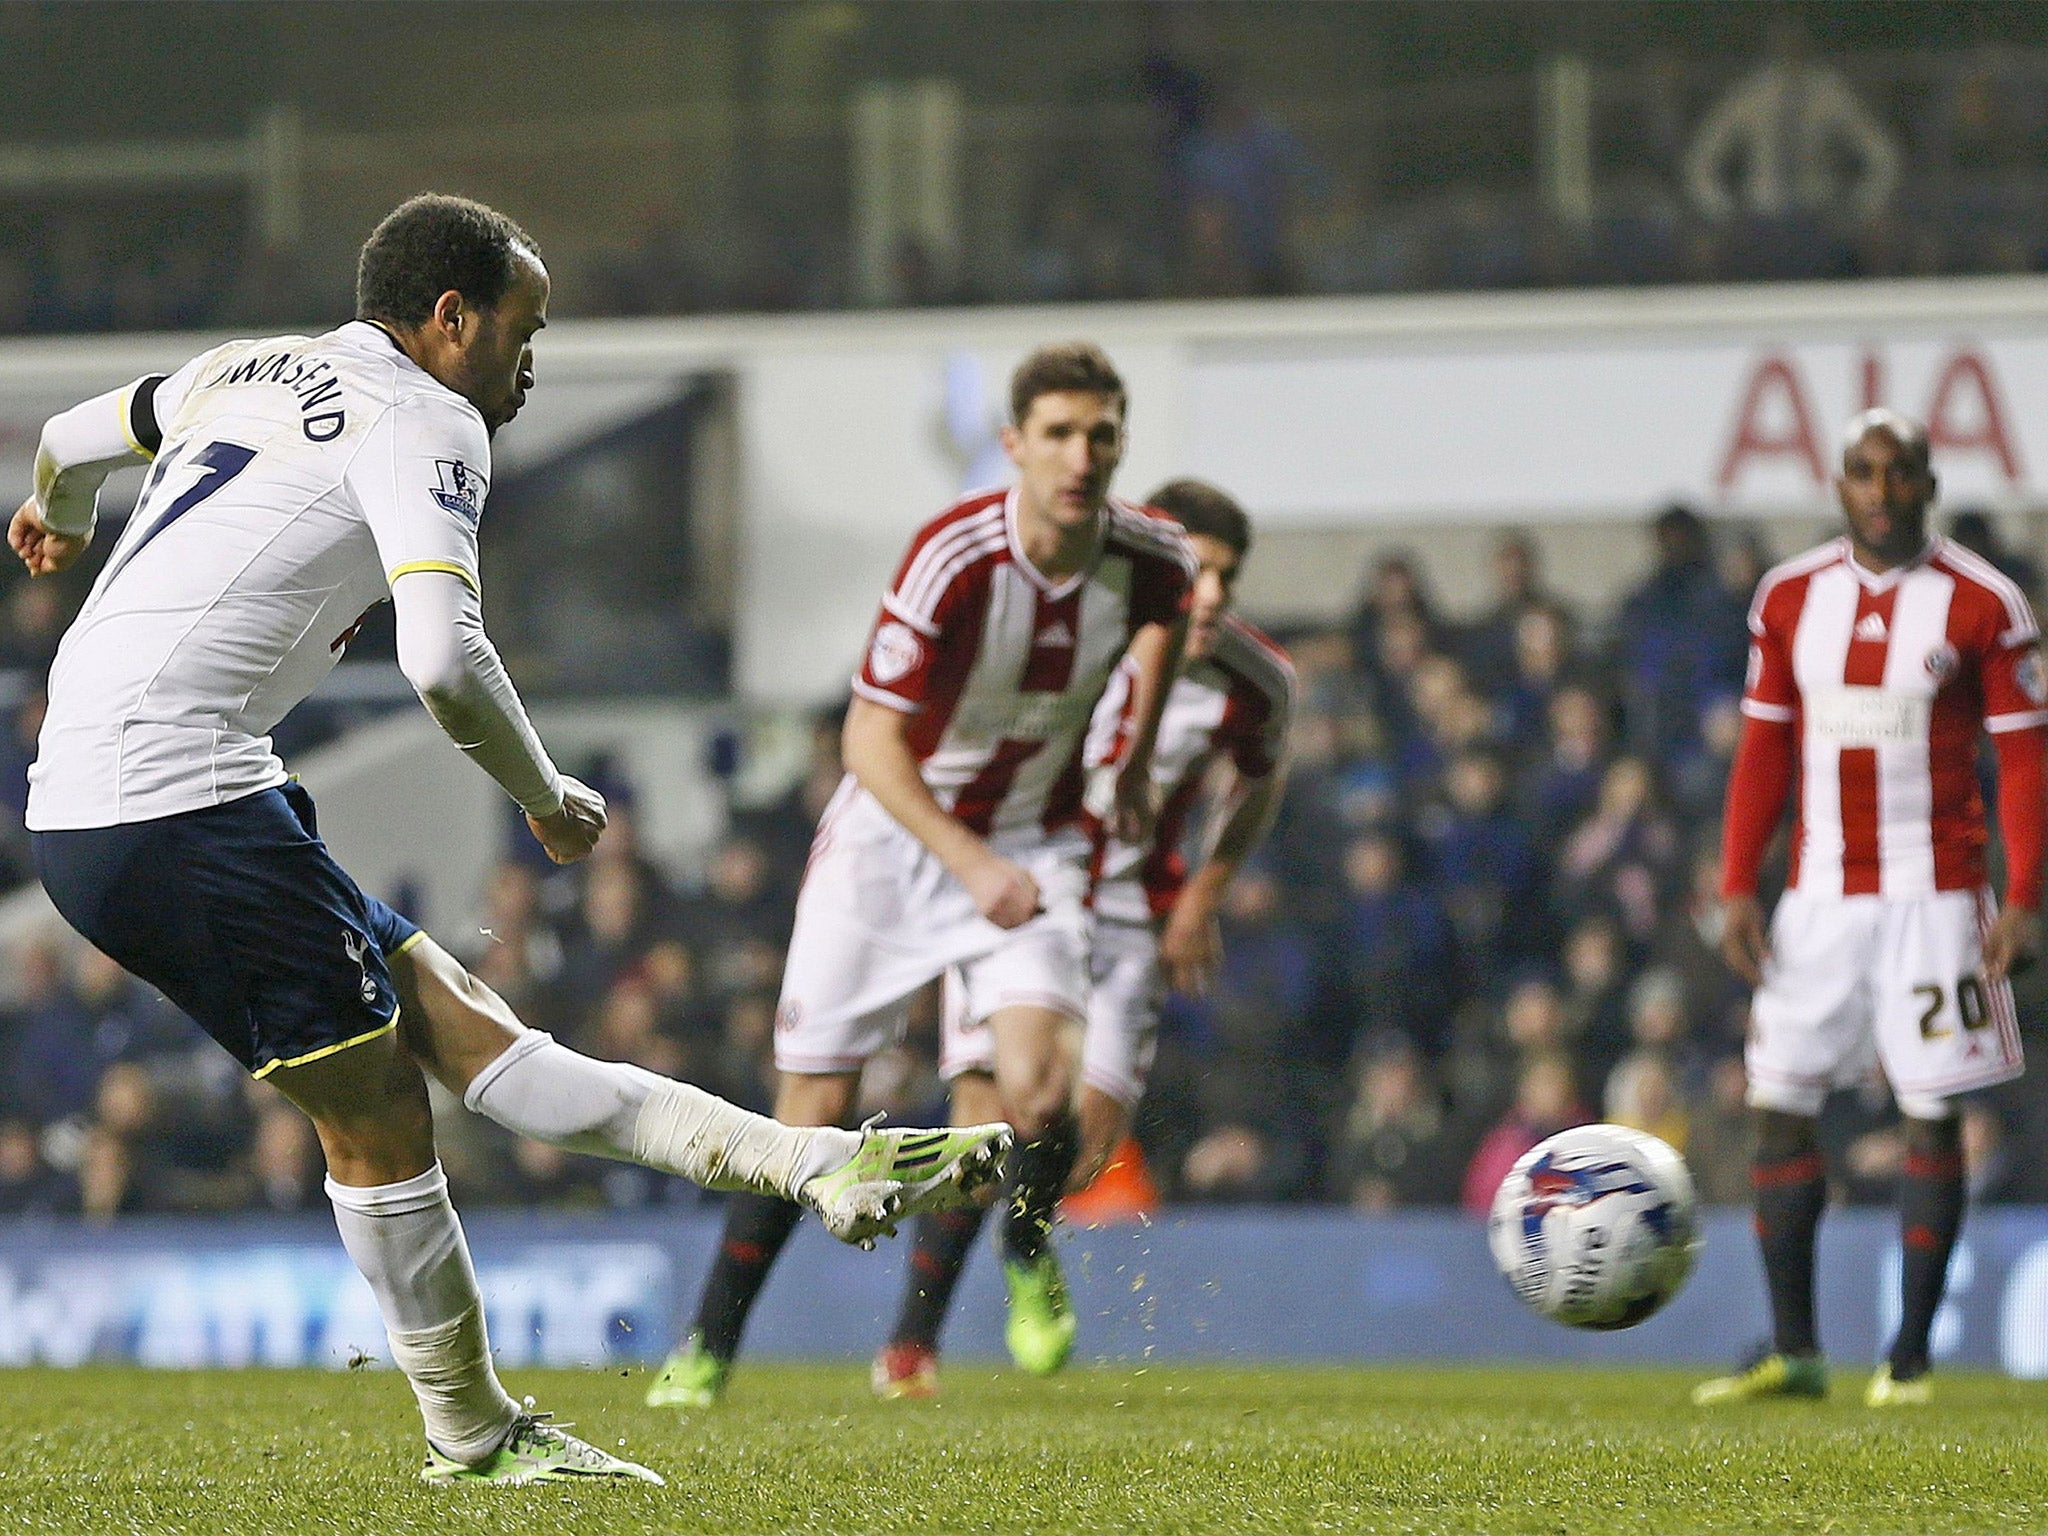 Andros Townsend scores the winning goal from the penalty spot